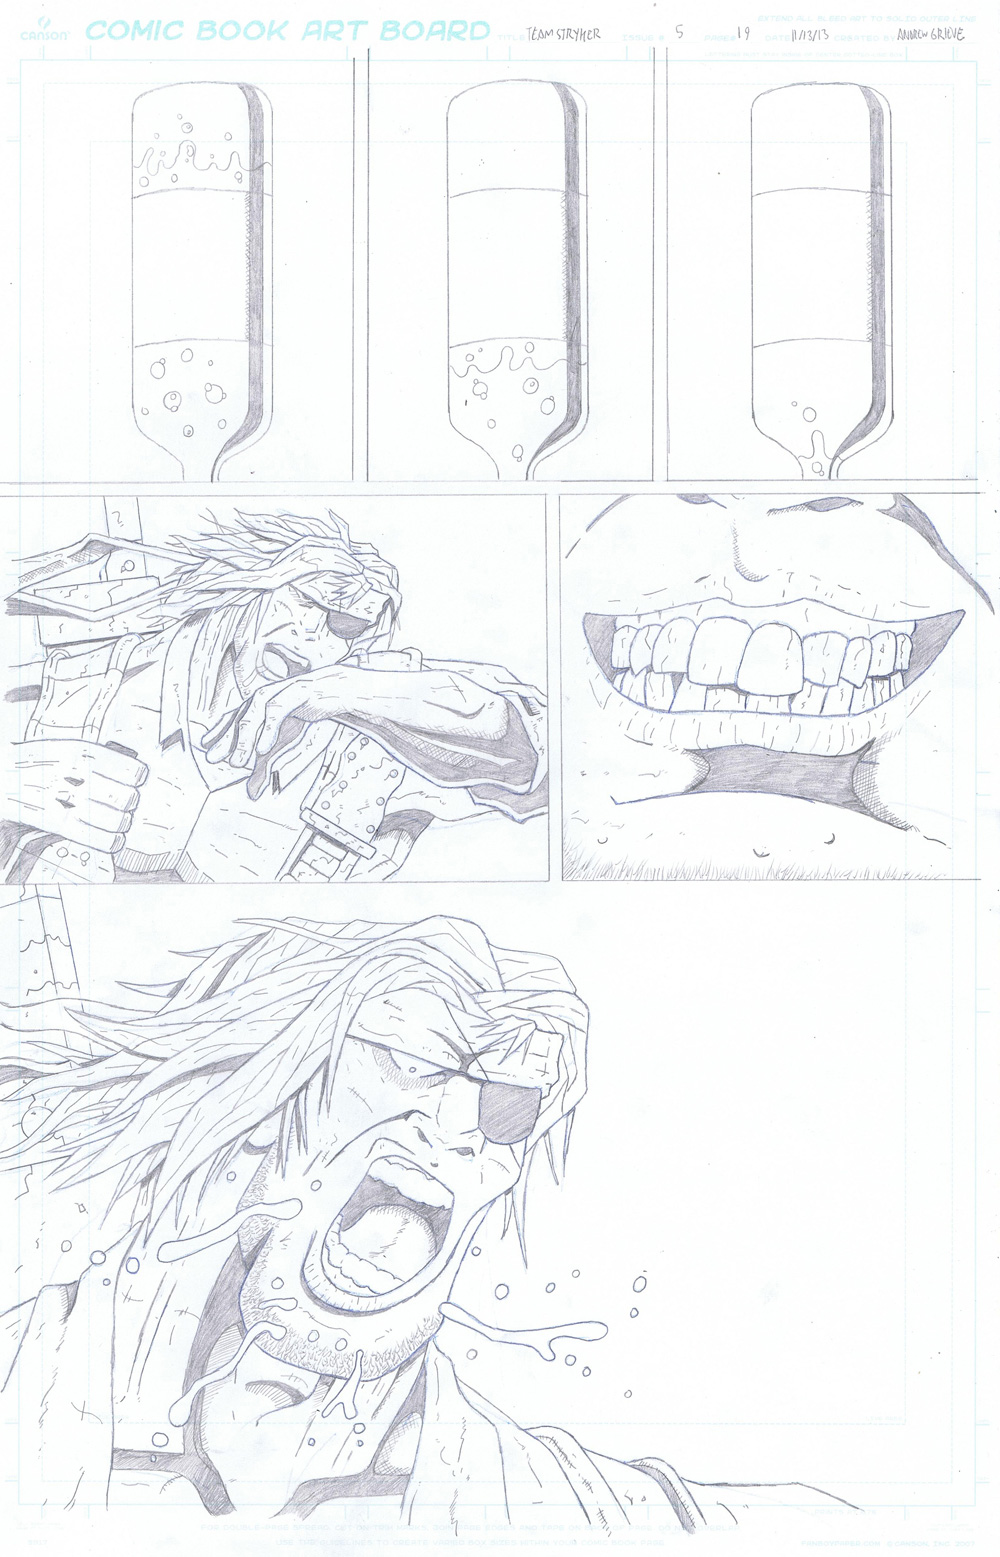 MISSION 005 PAGE 19 PENCIL